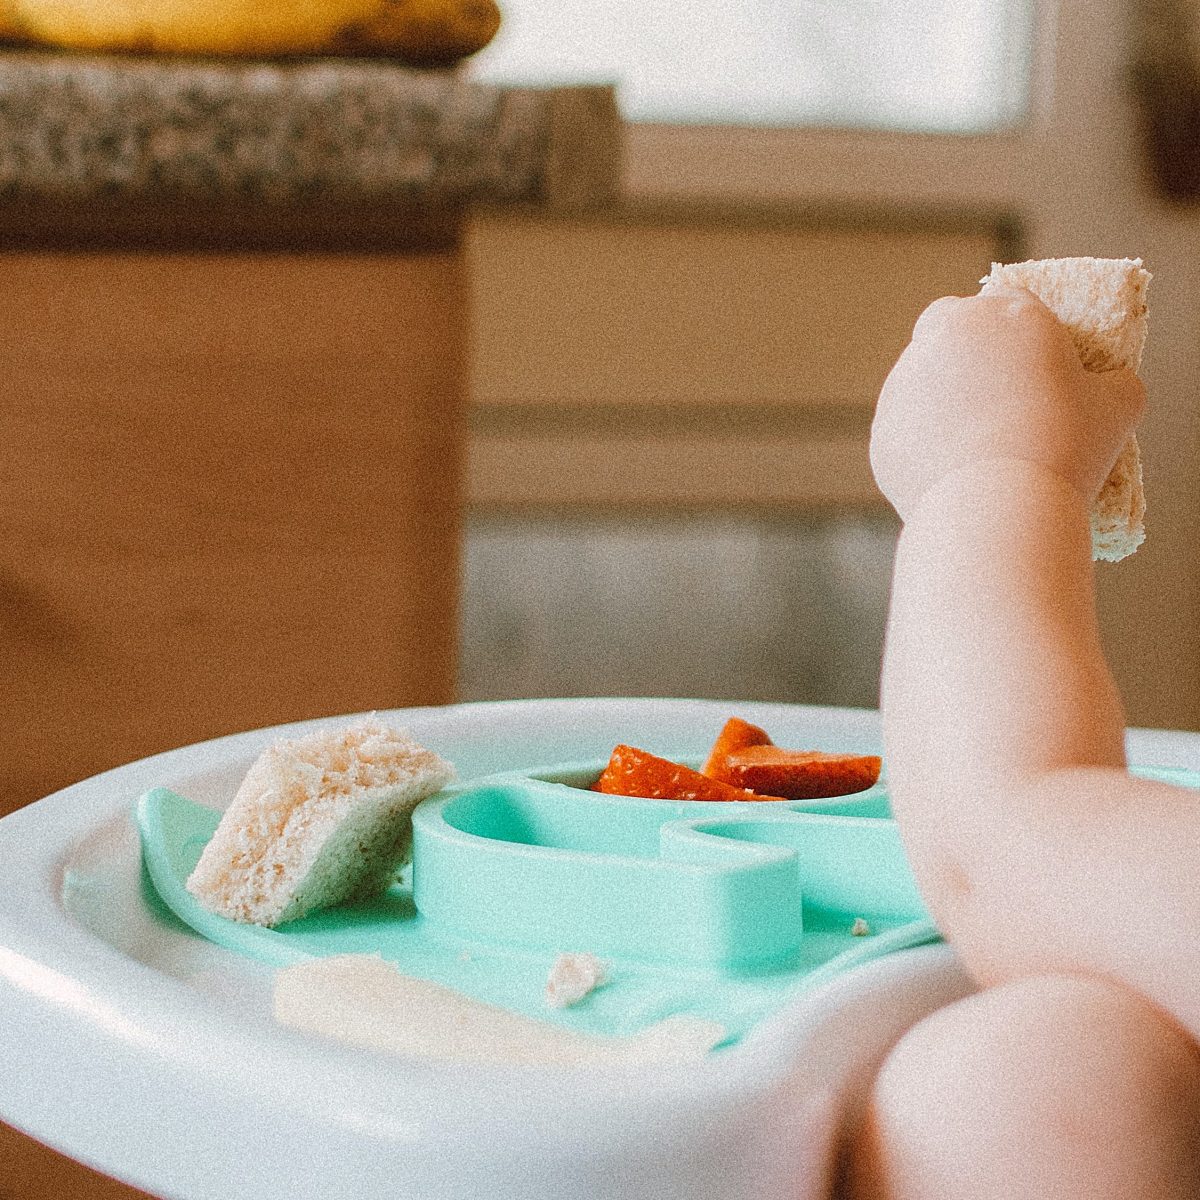 Is My Baby Ready for Solids? How Do I Know, and Where Do I Start?